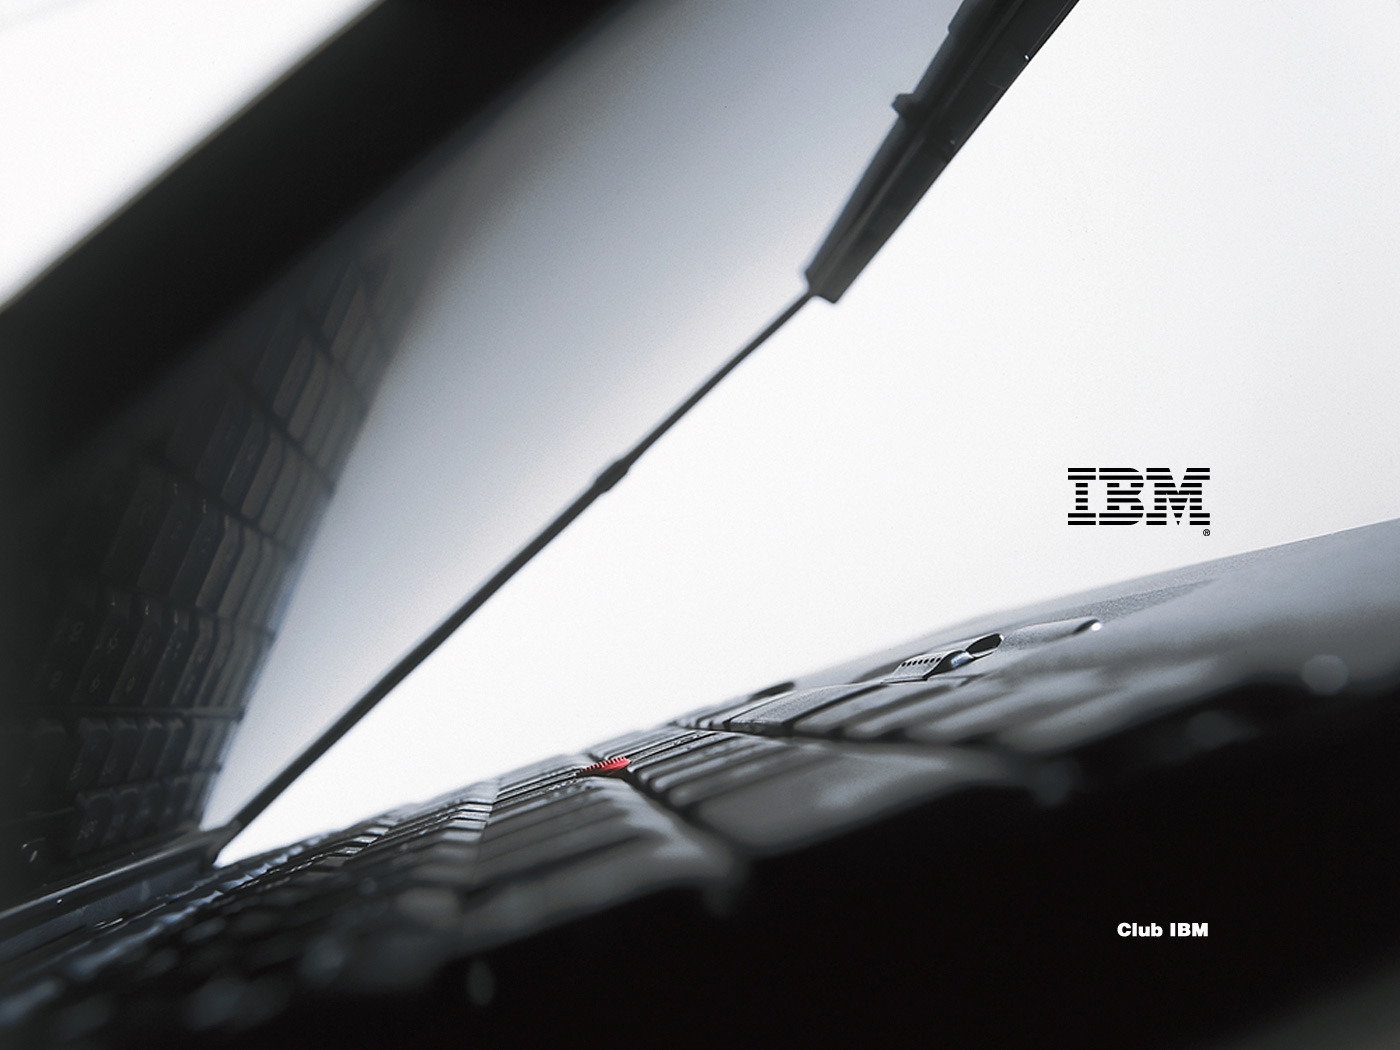 Loptop Ibm Wallpaper And Image Pictures Photos